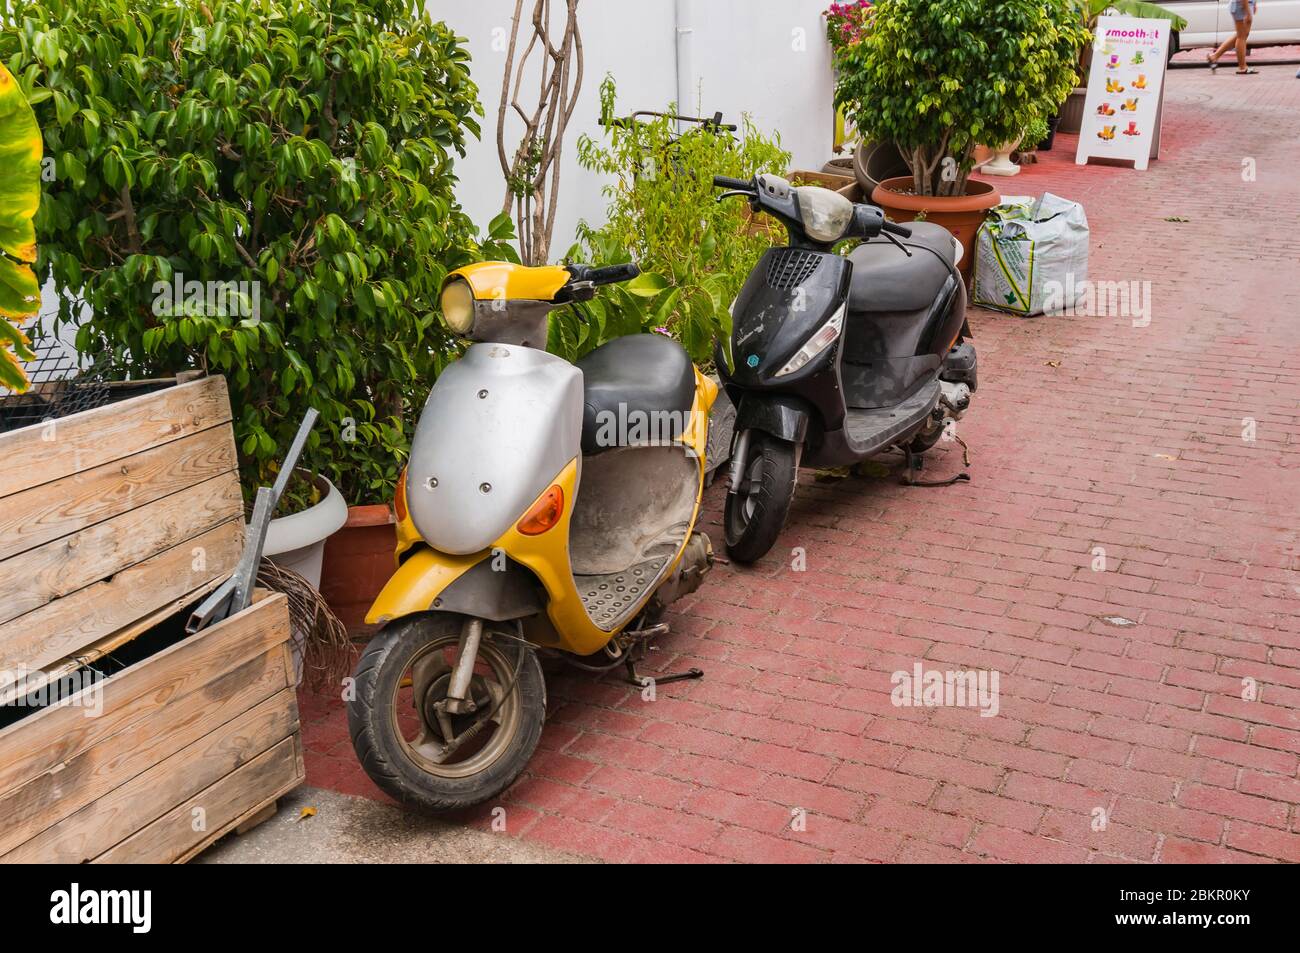 Bali, Crete, Greece - October 7, 2019: Old vintage scooters on a cozy street of the popular resort of Crete Stock Photo